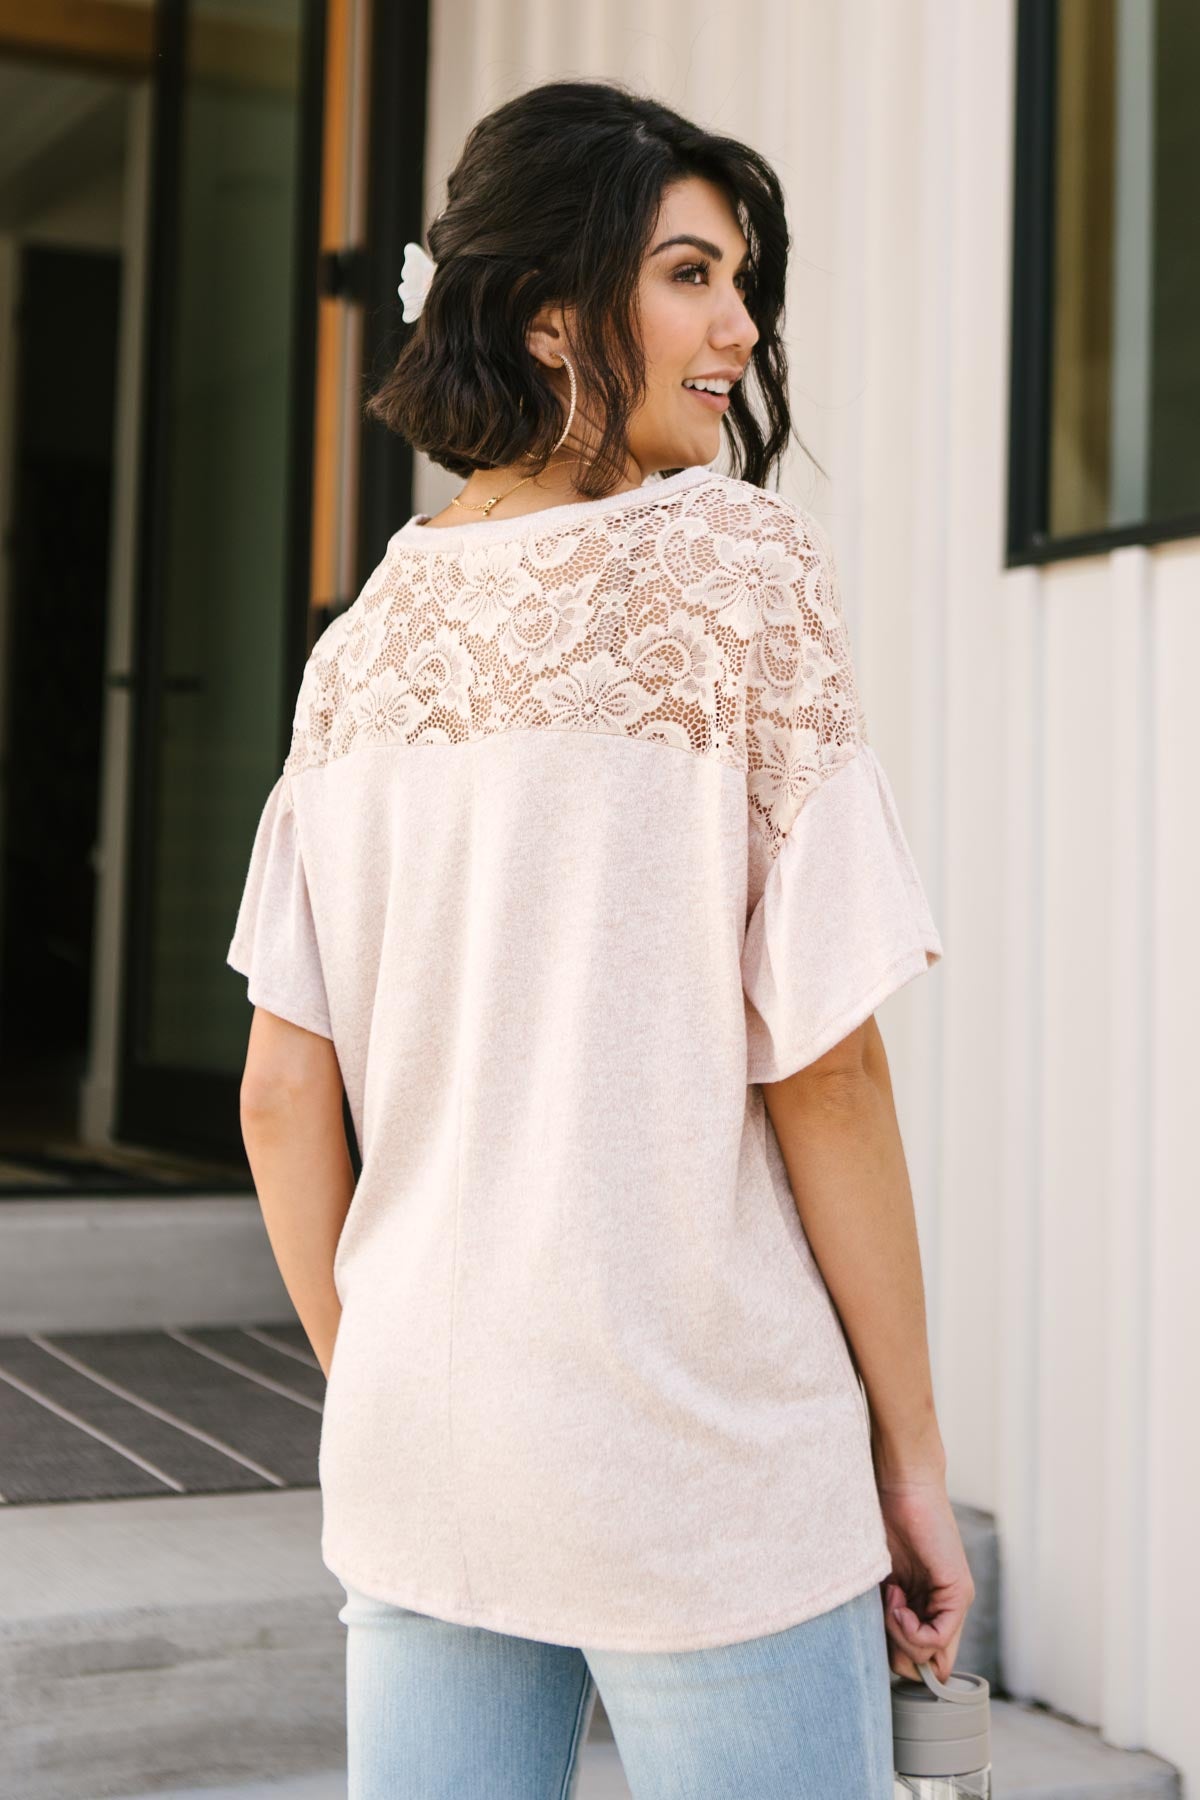 The Looking Around In Lace Top (Online Exclusives)